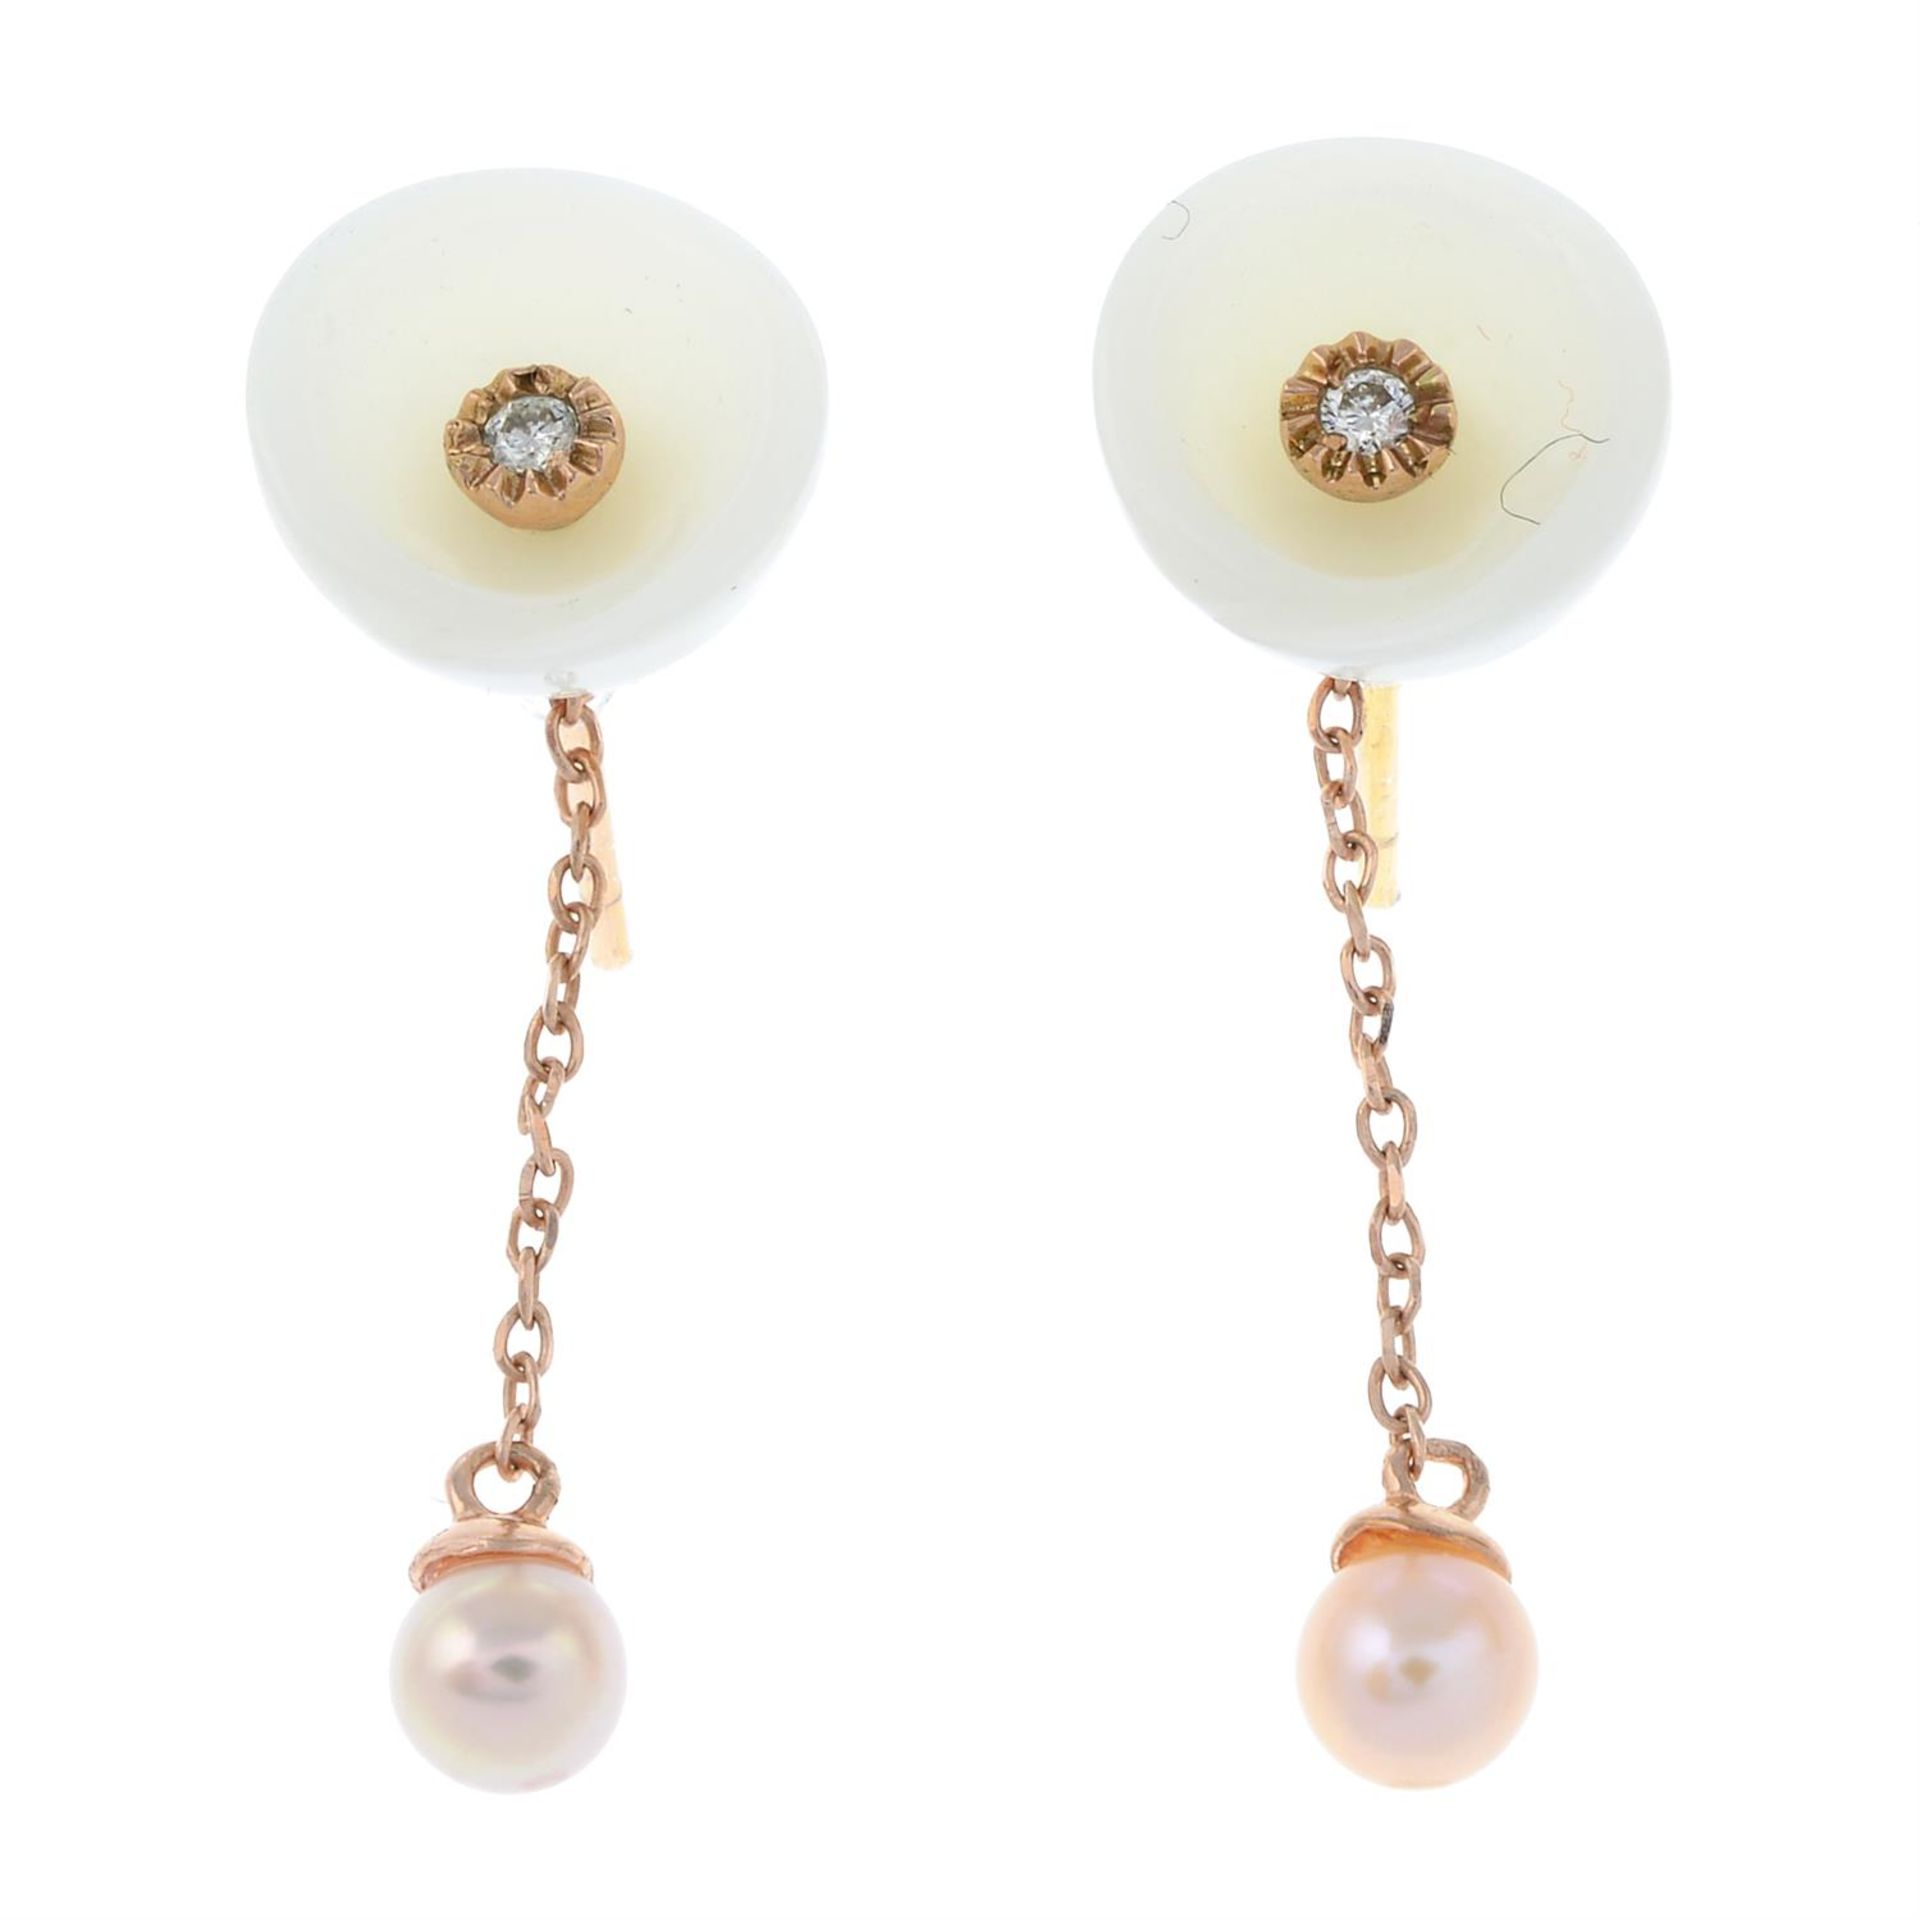 A pair of jade and diamond floral earrings, with cultured pearl detachable drop.